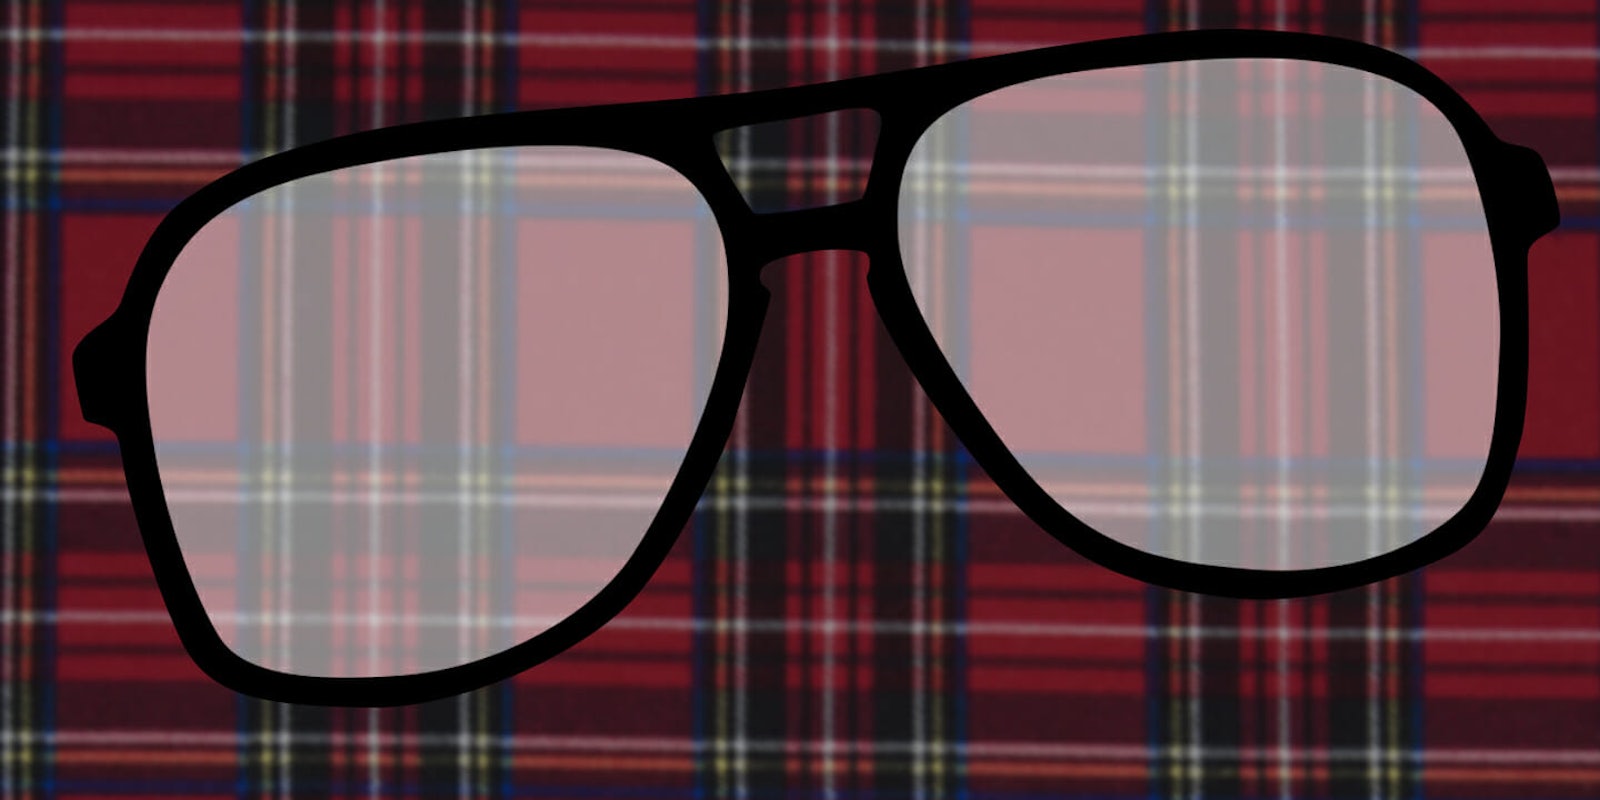 An illustration of plaid and large glasses typically worn by photographer Terry Richardson